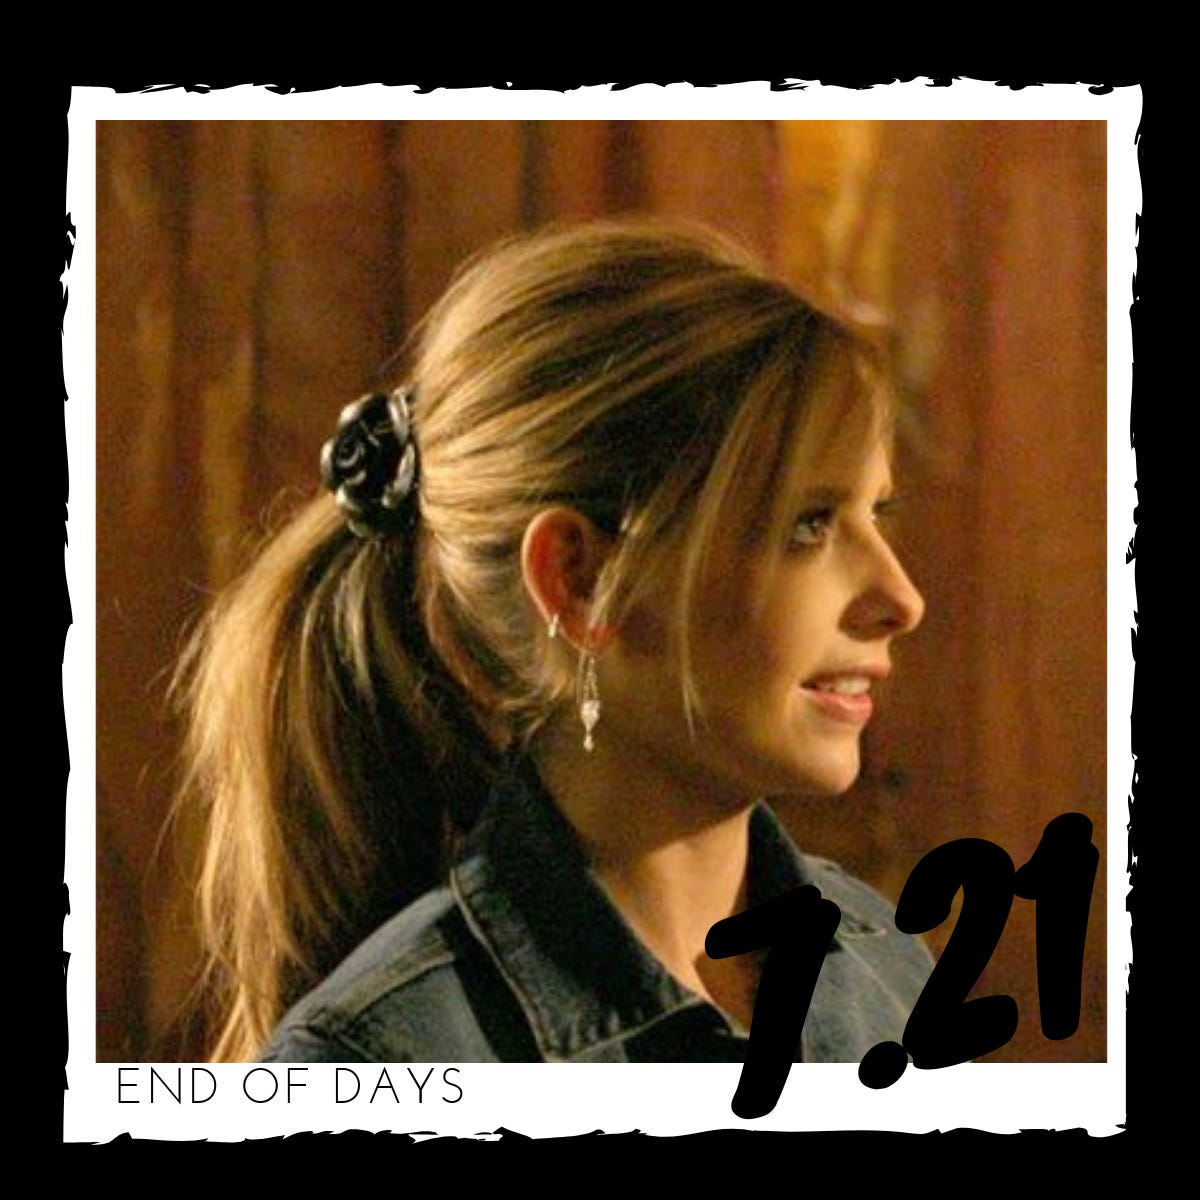 7.21 – ”End of Days”